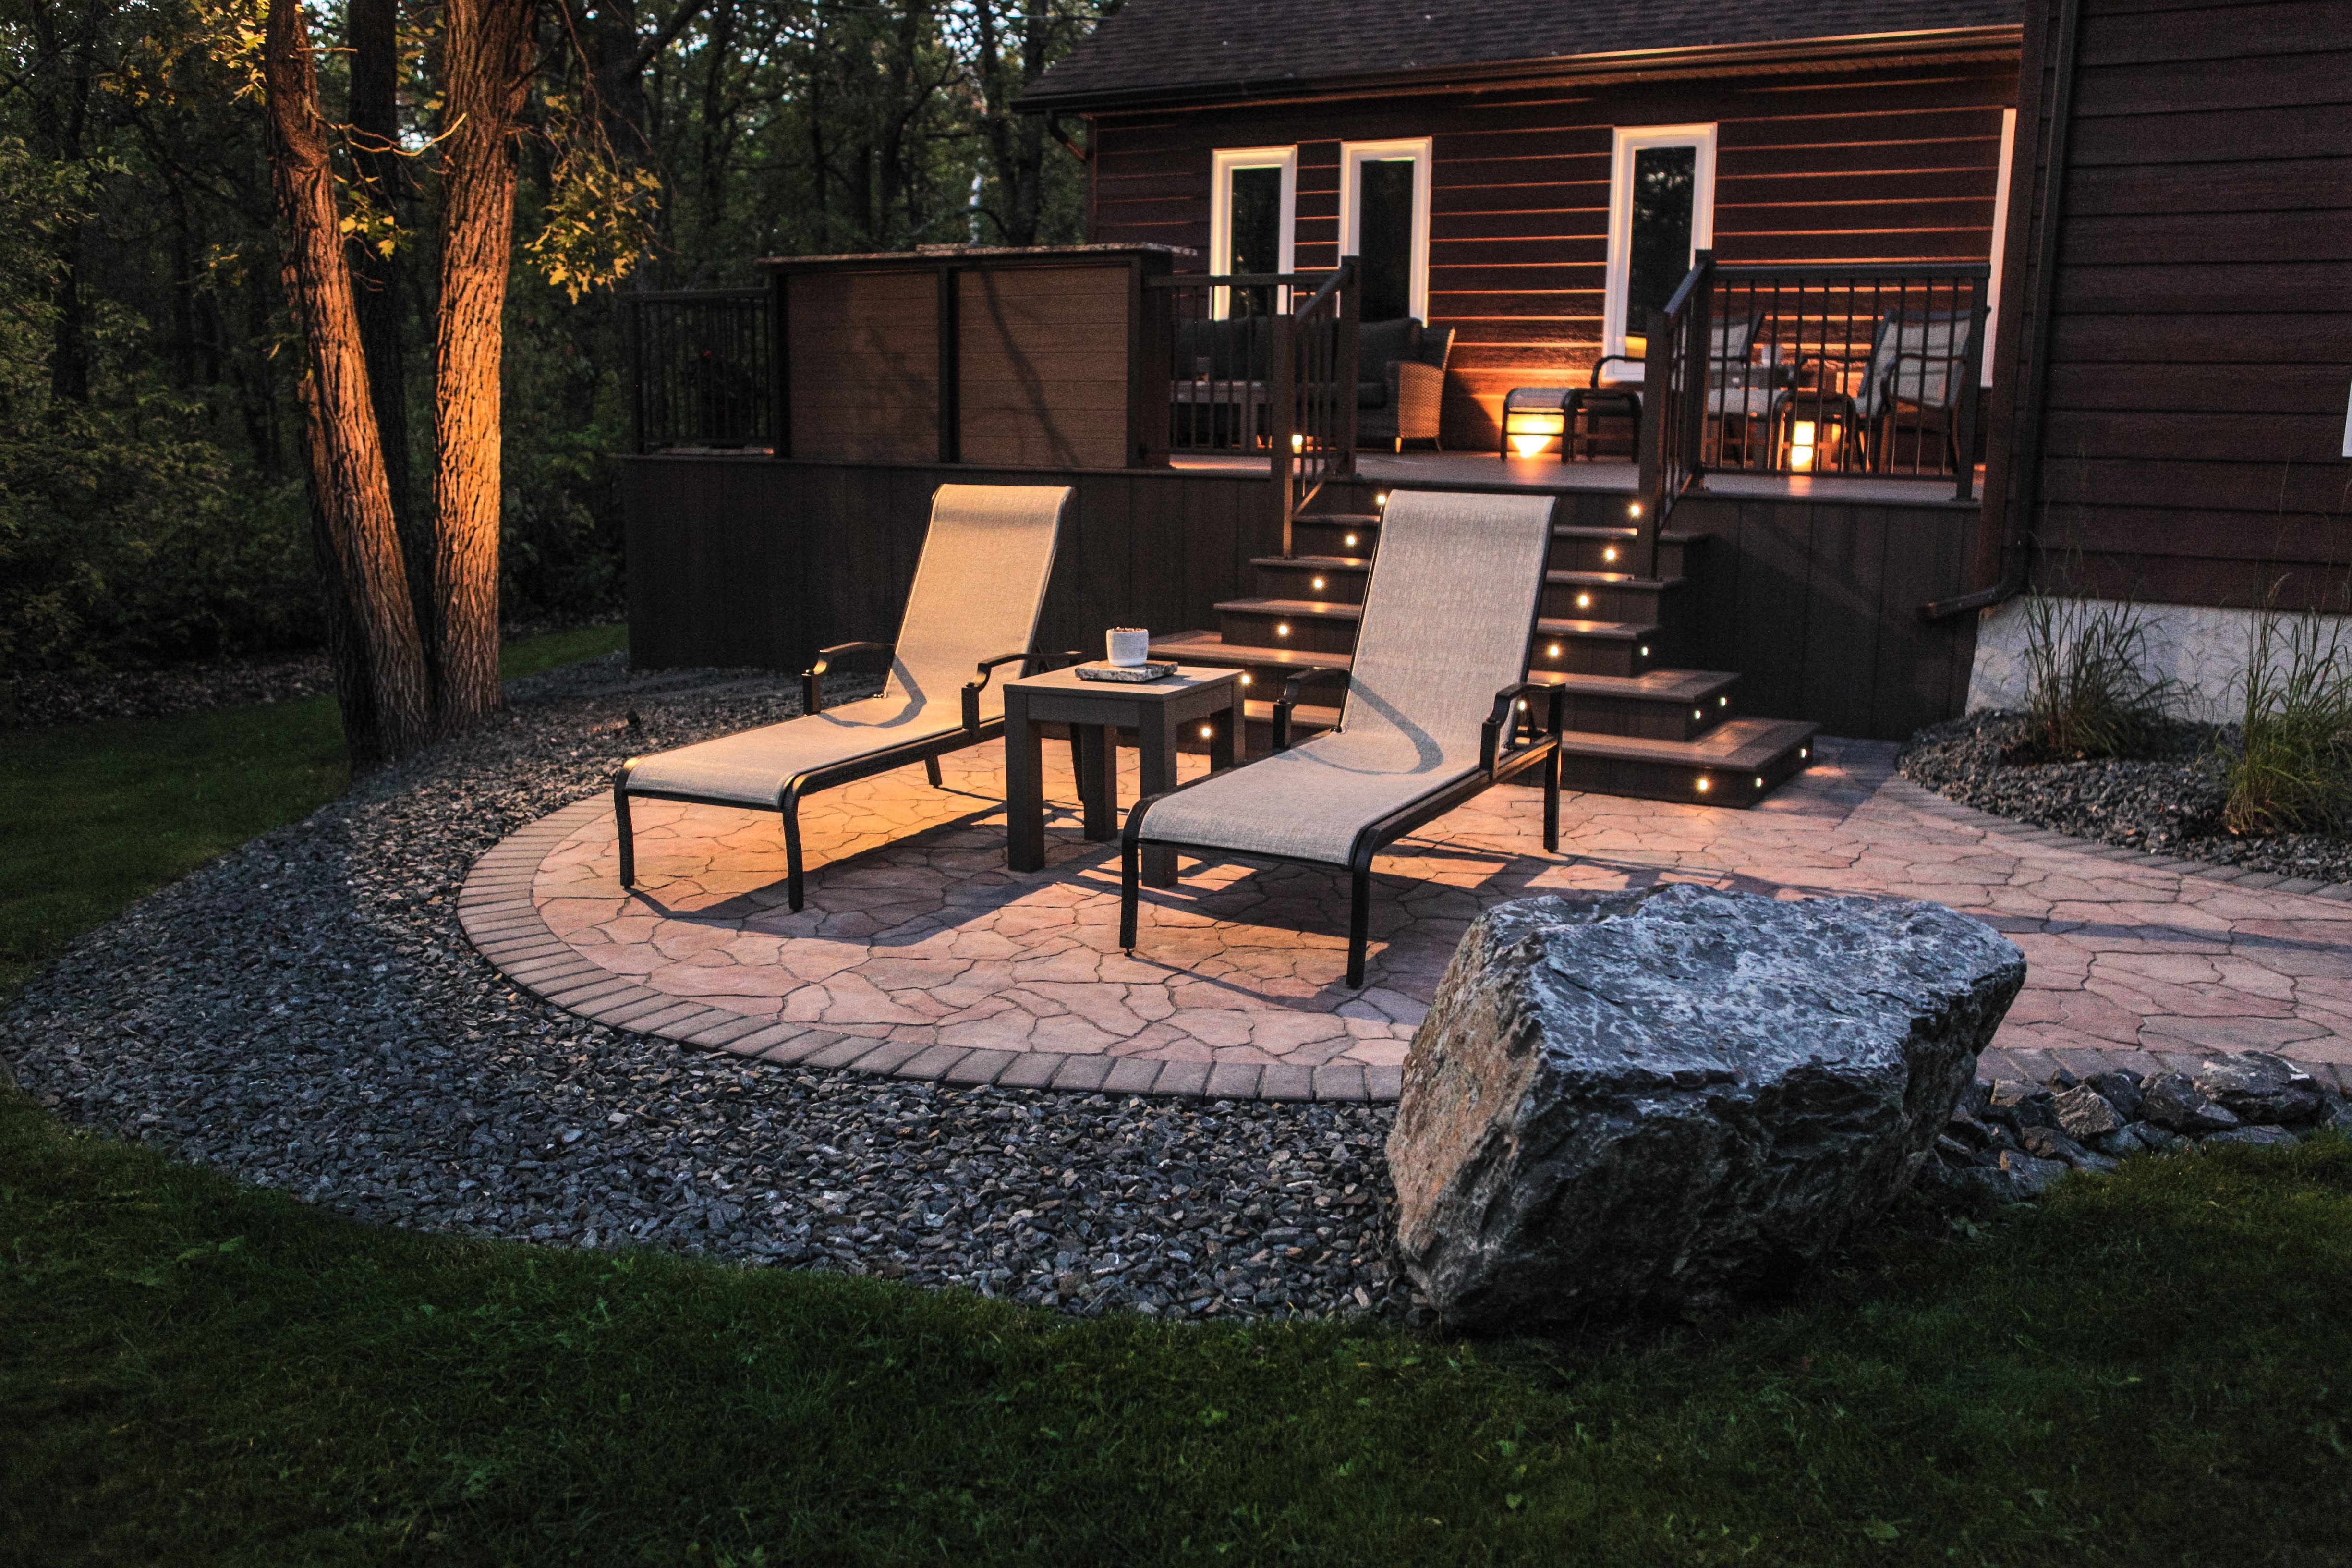 Timeless Beauty with Flagstone Patio Installation by Home Service Specialists (patio installation Kirkland, patio installation Bellevue). This captivating flagstone patio, installed by the experts at Home Service Specialists in Kirkland or Bellevue, WA, showcases the natural elegance and enduring charm of flagstone. The organic variations in color and texture create a visually stunning outdoor space perfect for entertaining, relaxing, or enjoying the fresh air. Flagstone offers a durable and low-maintenance foundation for your patio, adding lasting value to your Kirkland or Bellevue home. (Best Patio Installation Kirkland | Best Patio Installation Bellevue | Home Service Specialists | Flagstone Patio Installations)